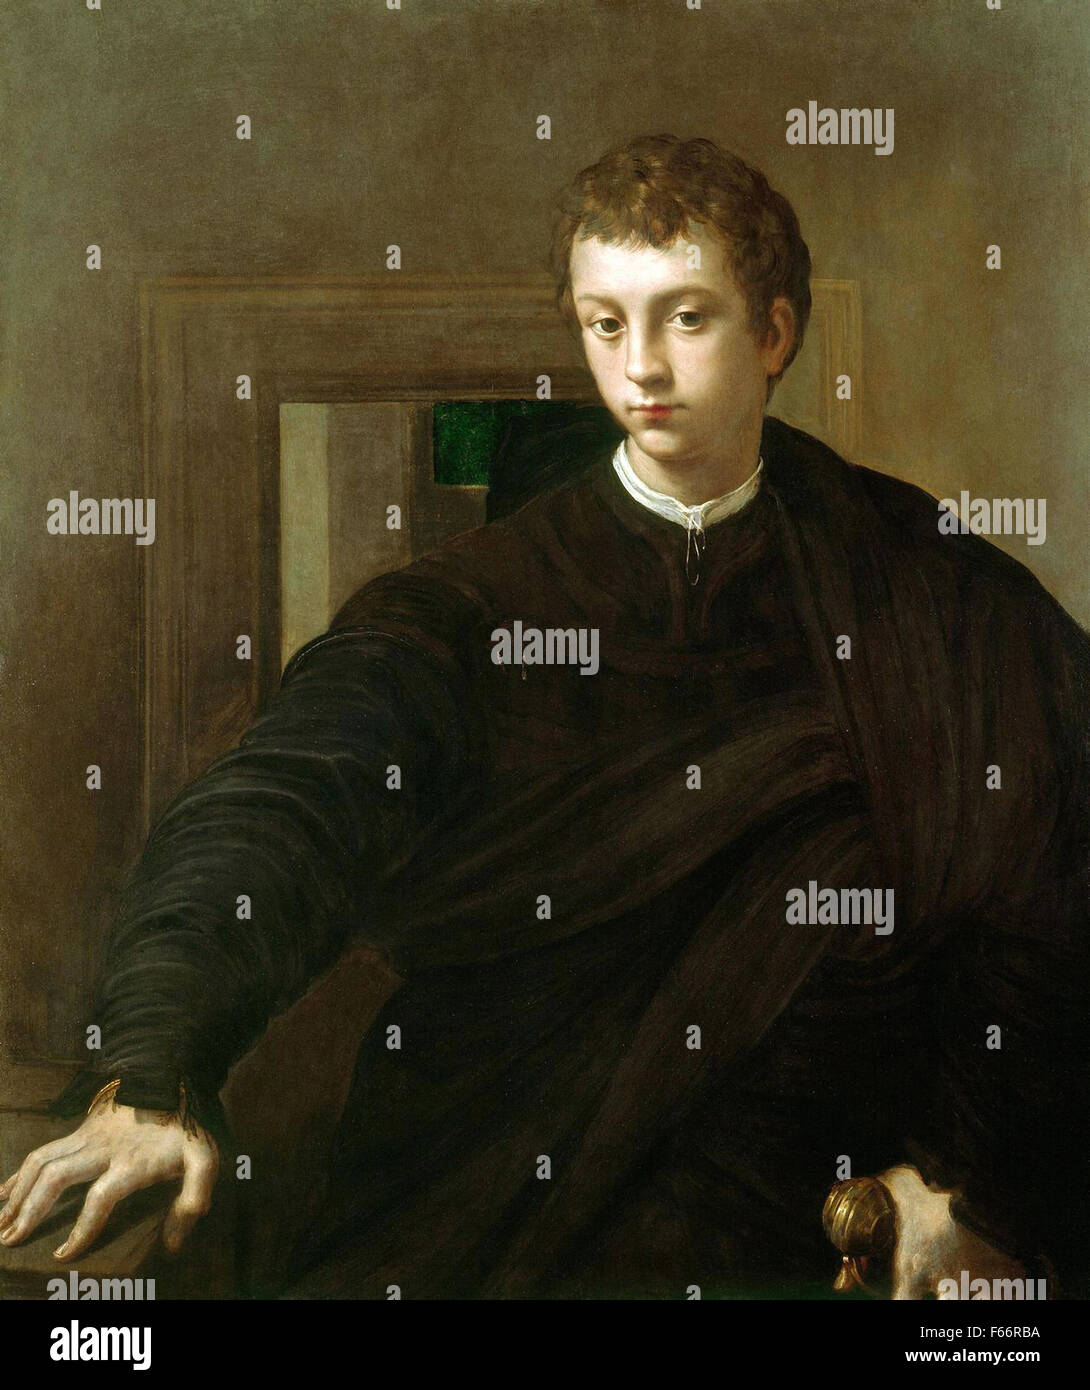 Parmigianino - Portrait of a Young Nobleman Stock Photo